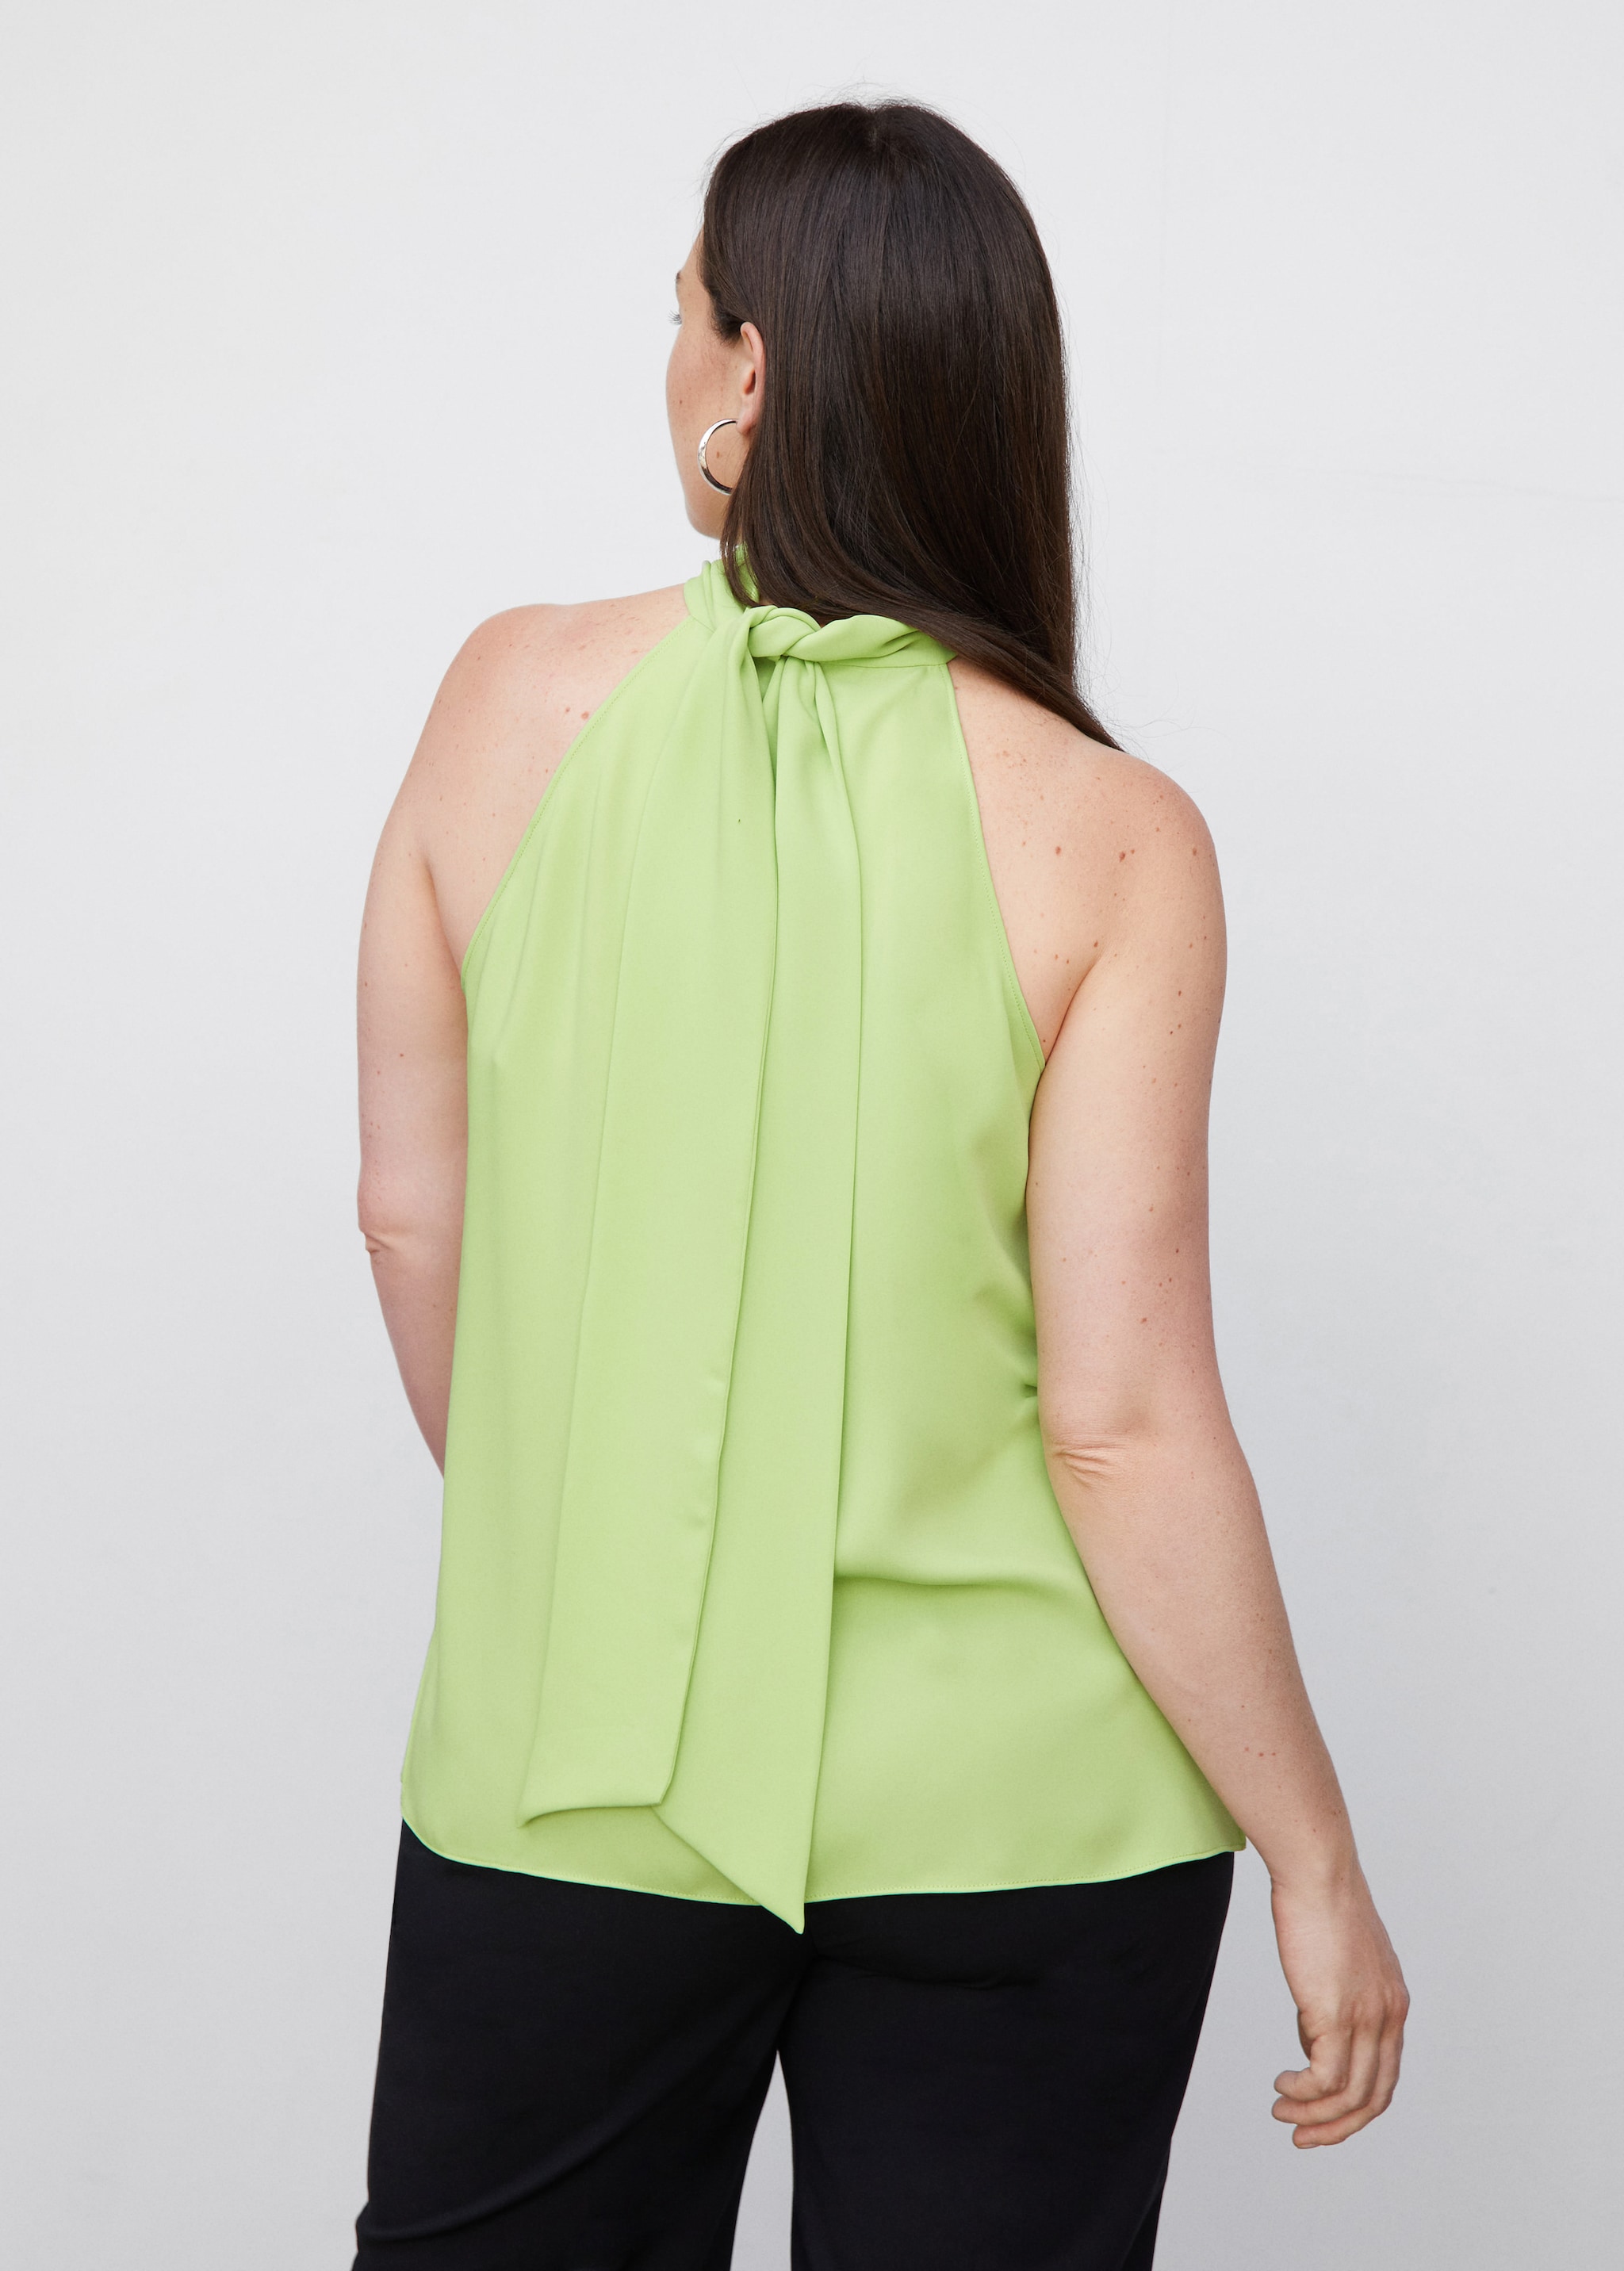 Halter top with slit detail - Details of the article 4